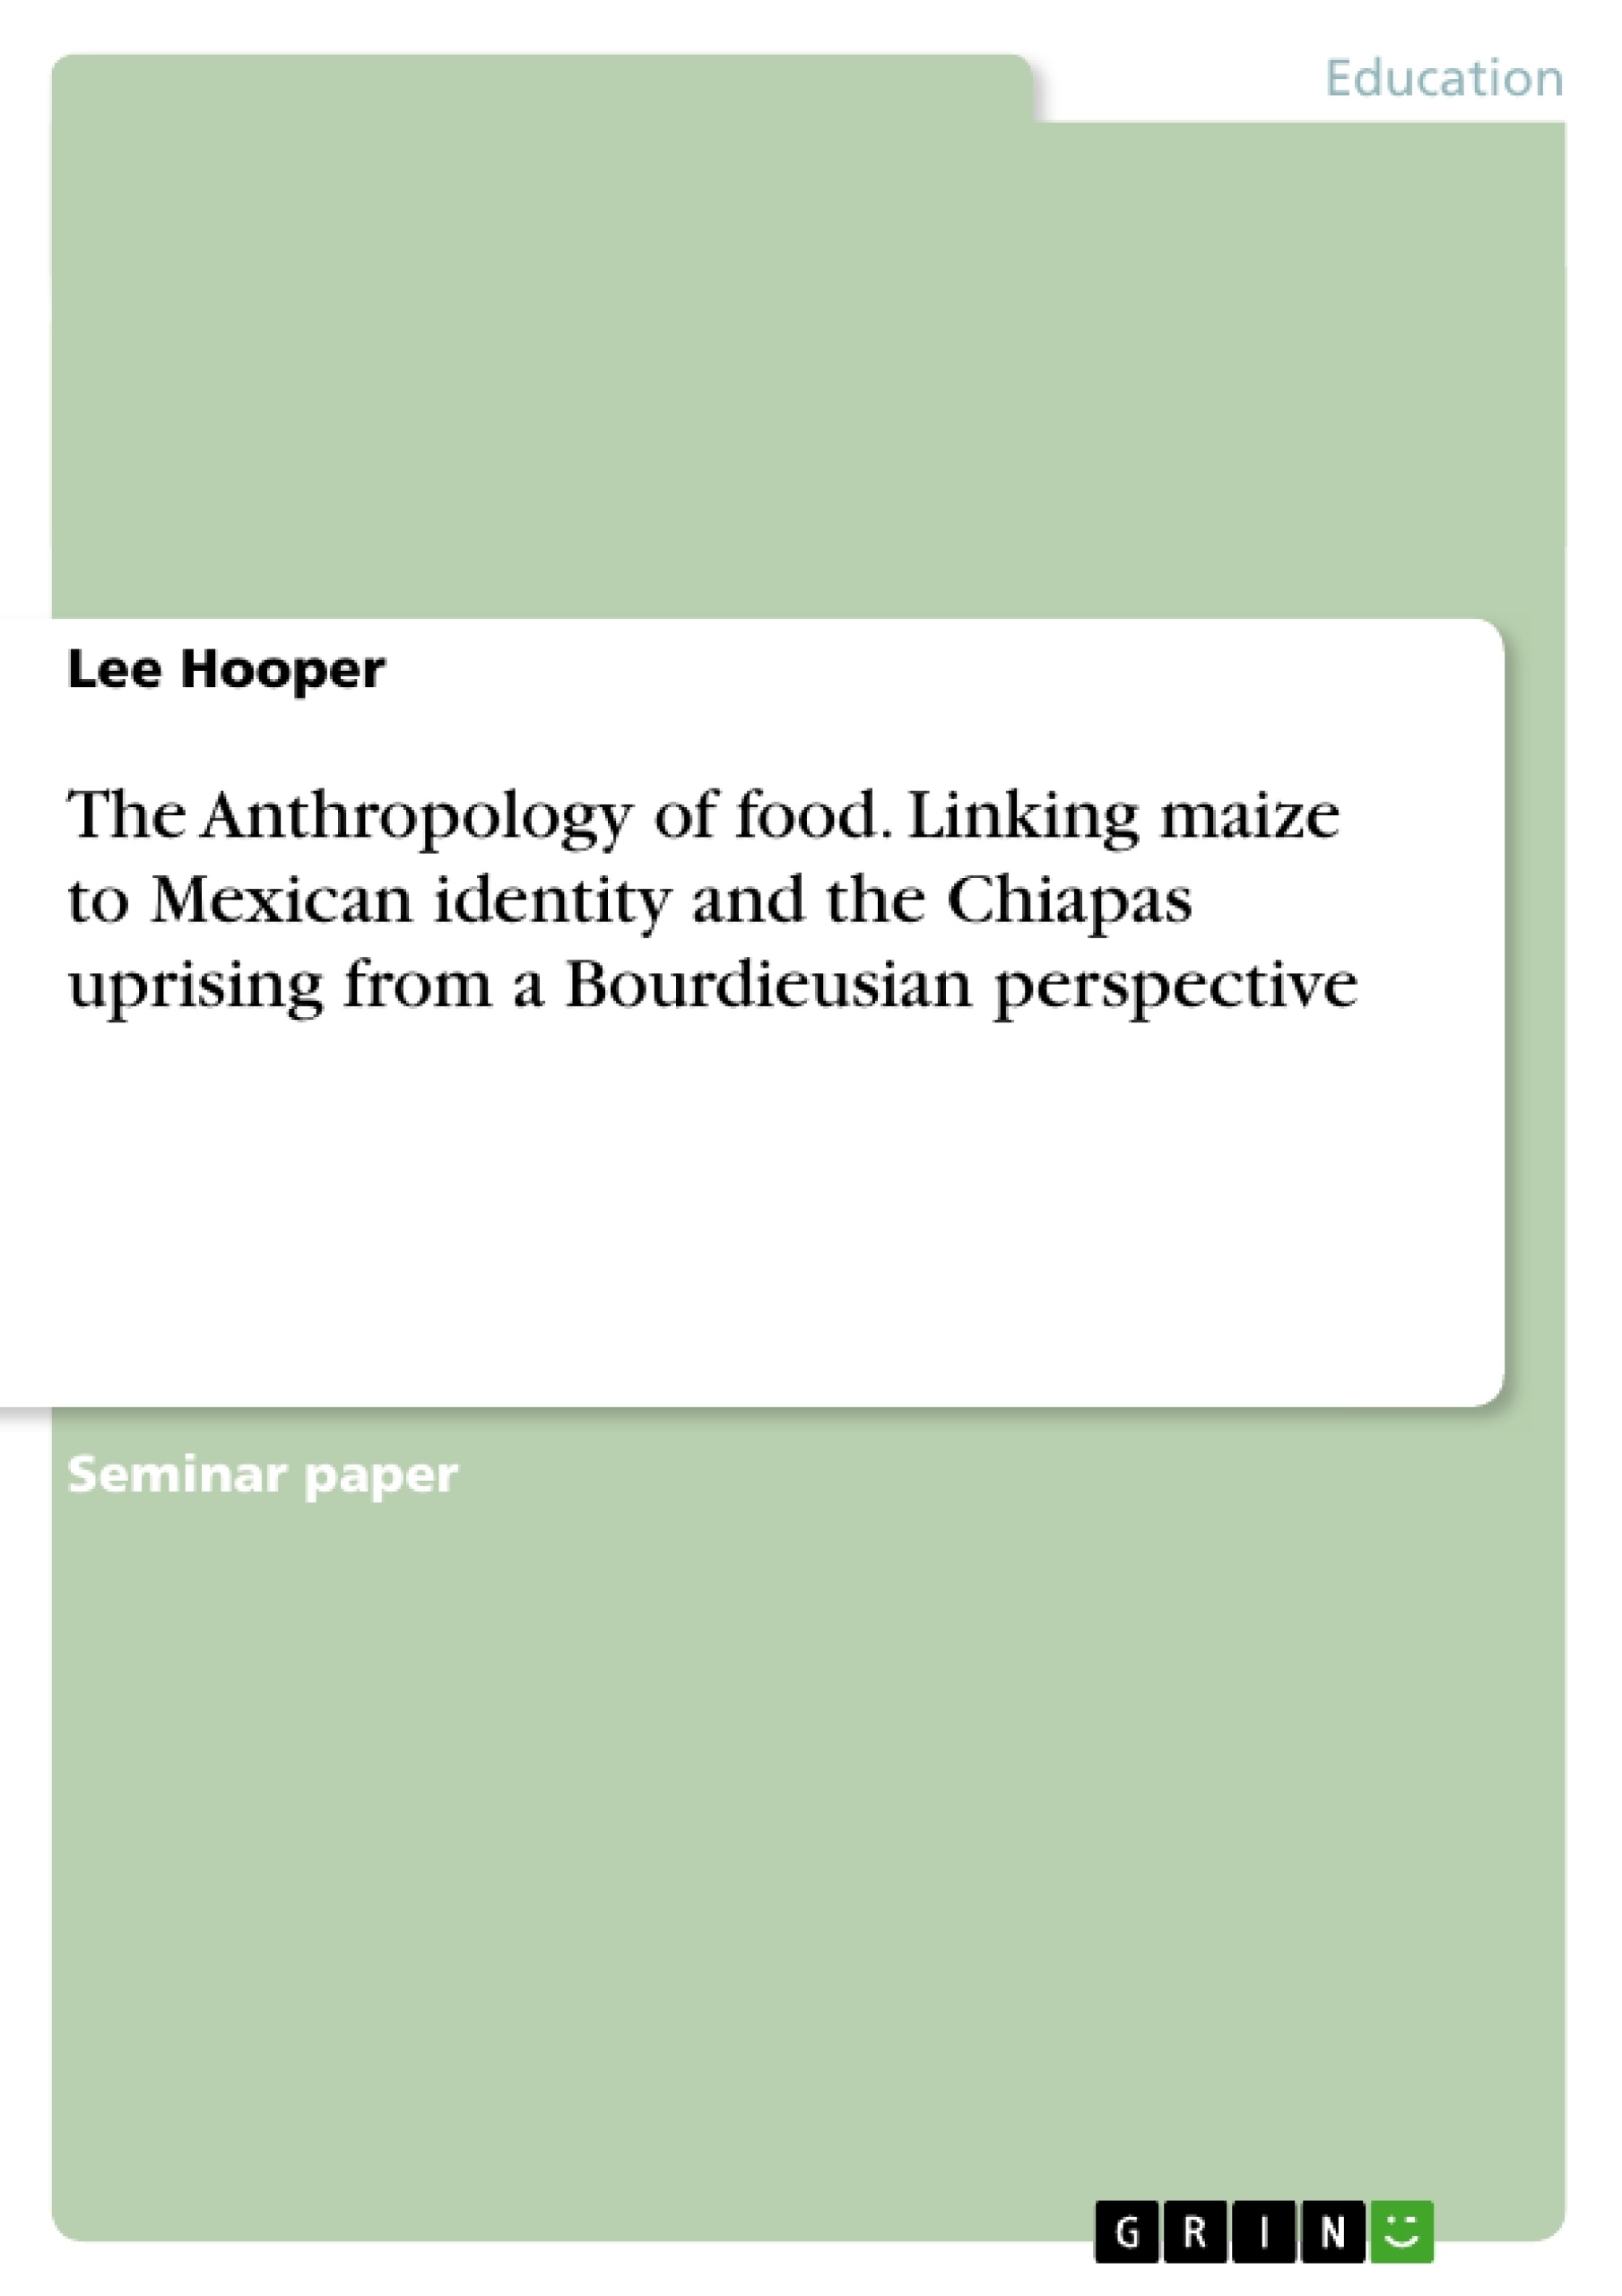 Título: The Anthropology of food. Linking maize to Mexican identity and the Chiapas uprising from a Bourdieusian perspective